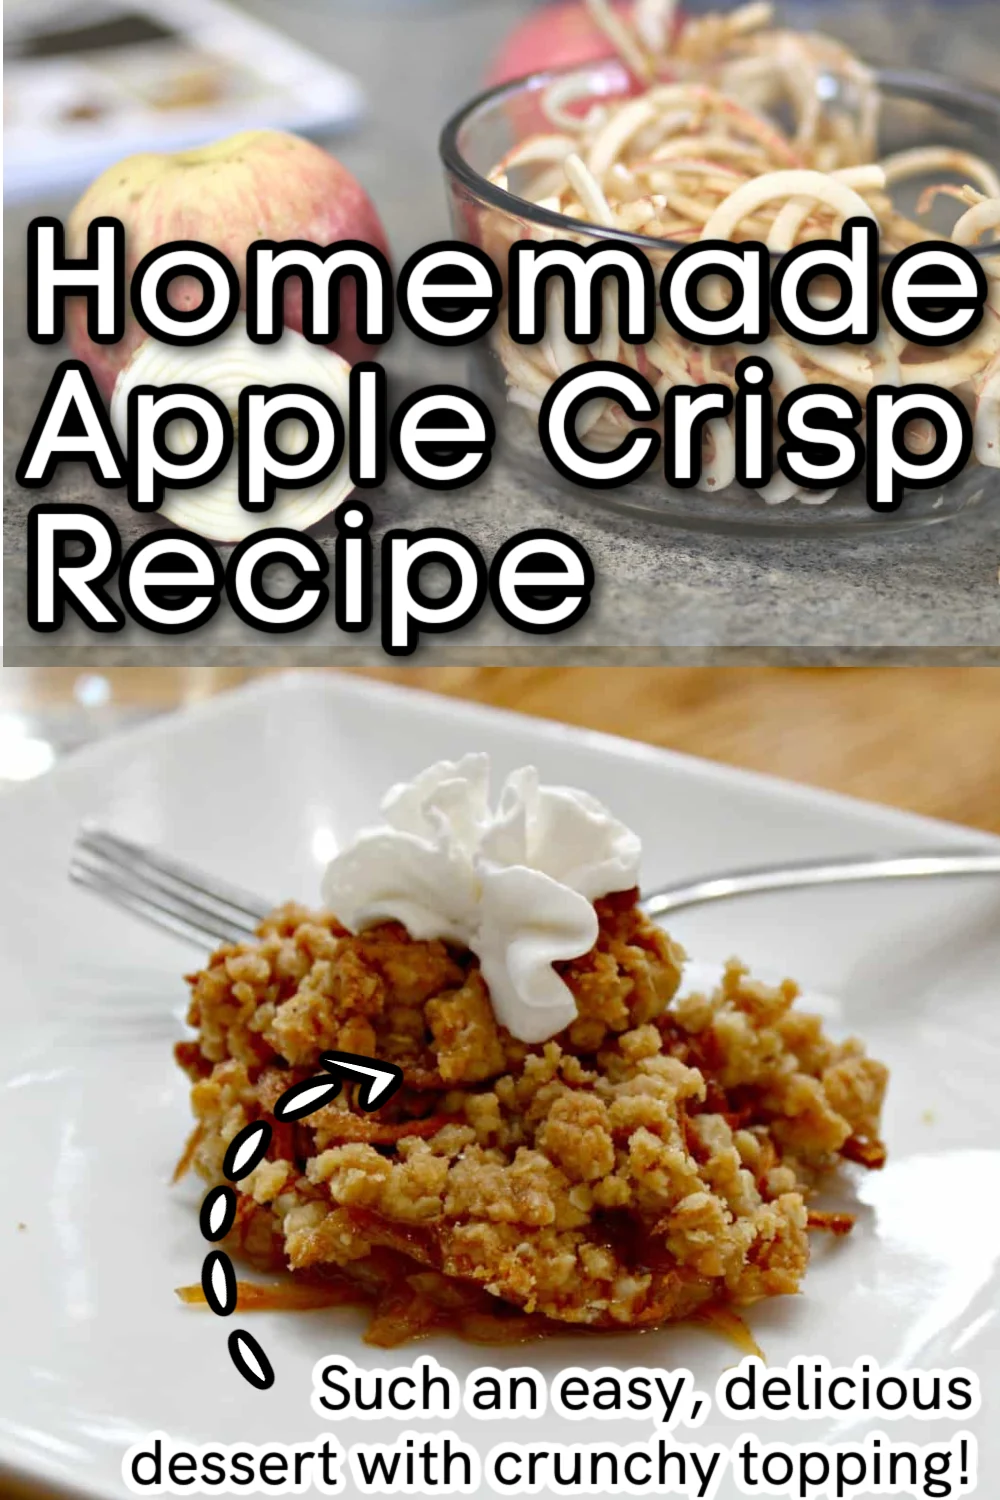 a collage with the top photo showing spiralized apples and the bottom photo showing a completed apple crisp with a text overlay that says, "Homemade apple crisp recipe - such an easy, delicious dessert with crunchy topping".